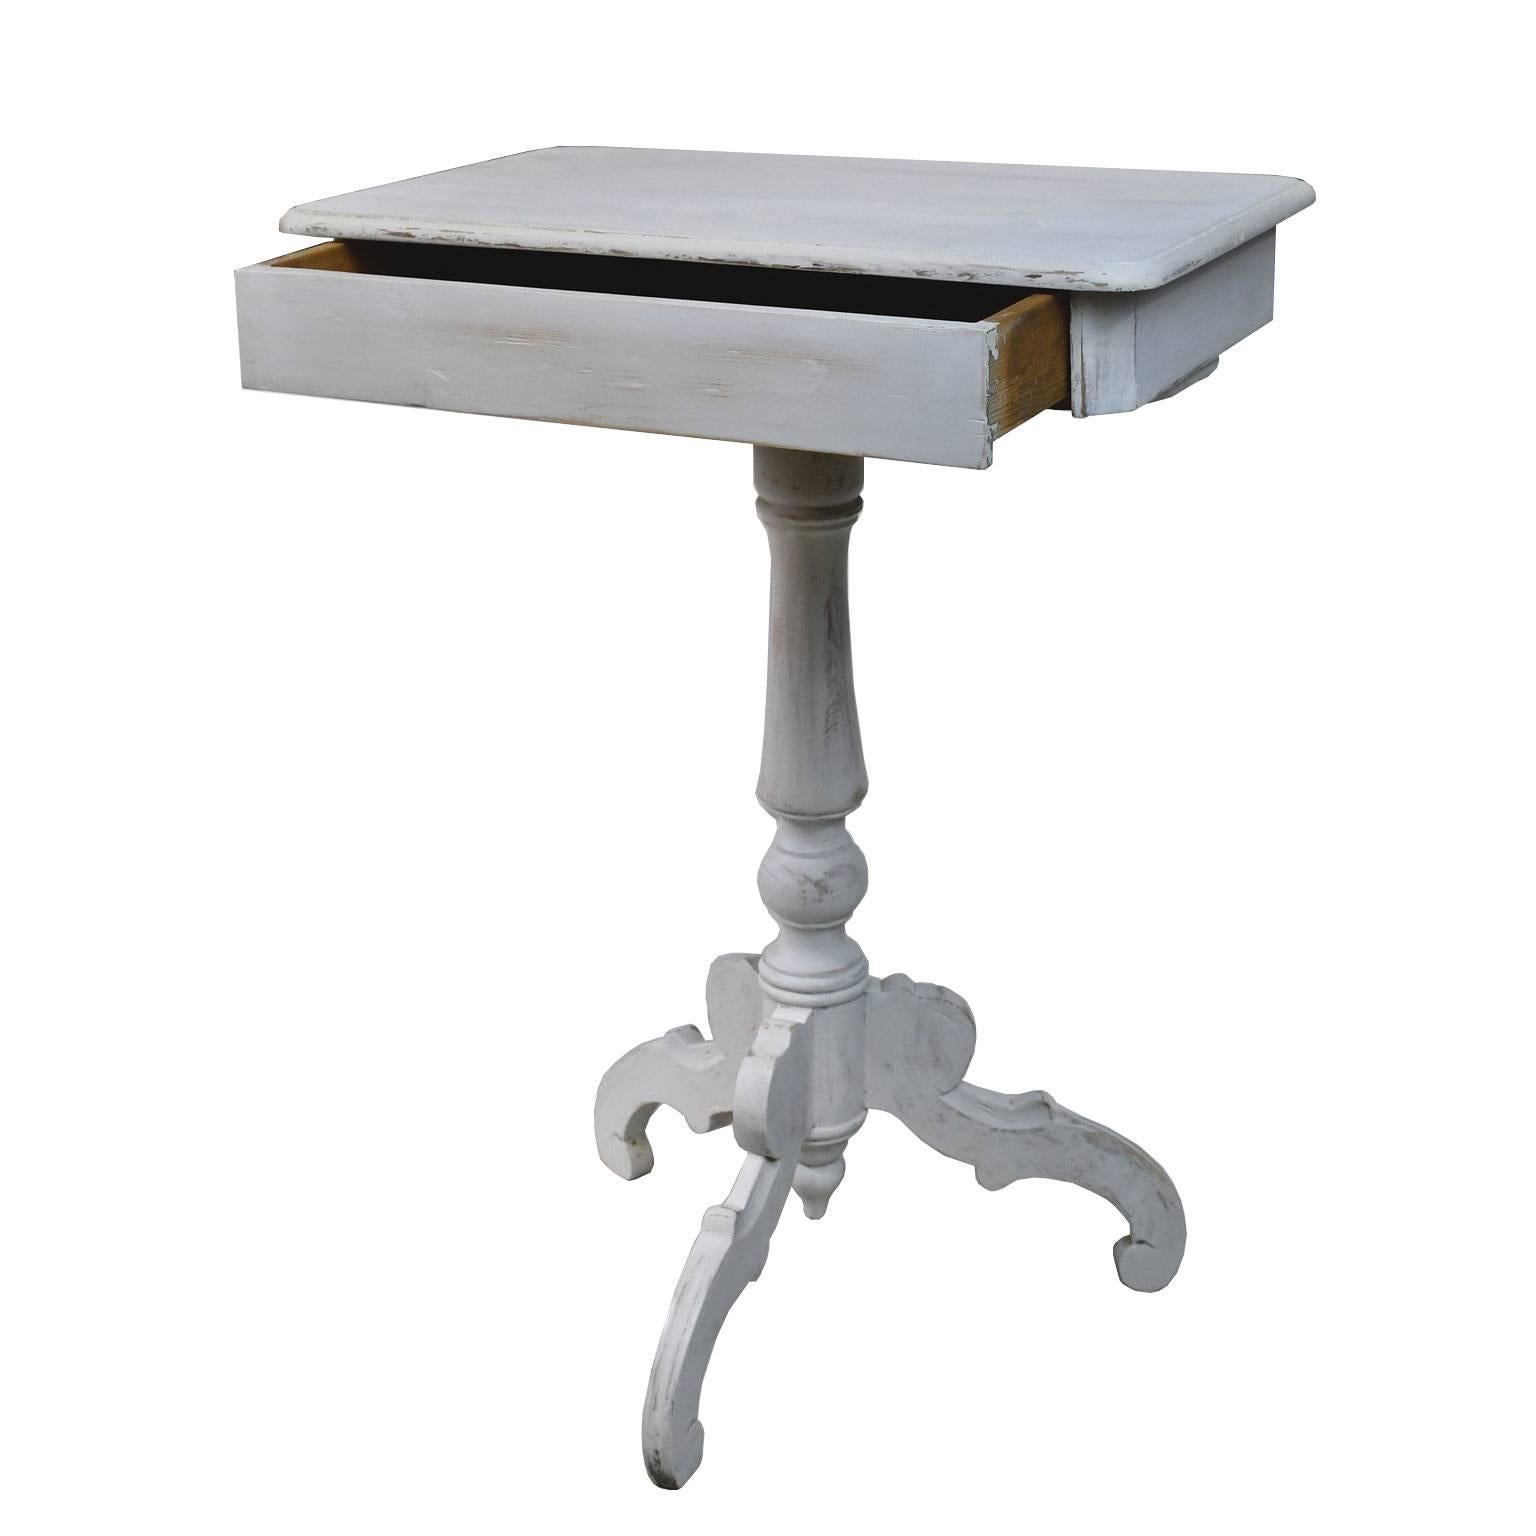 A charming & small Gustavian end table with rectangular top on tri-foot pedestal base, offering one drawer. Beautifully-restored by us, this Swedish table is painted a lovely shade of pale grey/white over the original pine, Sweden, circa